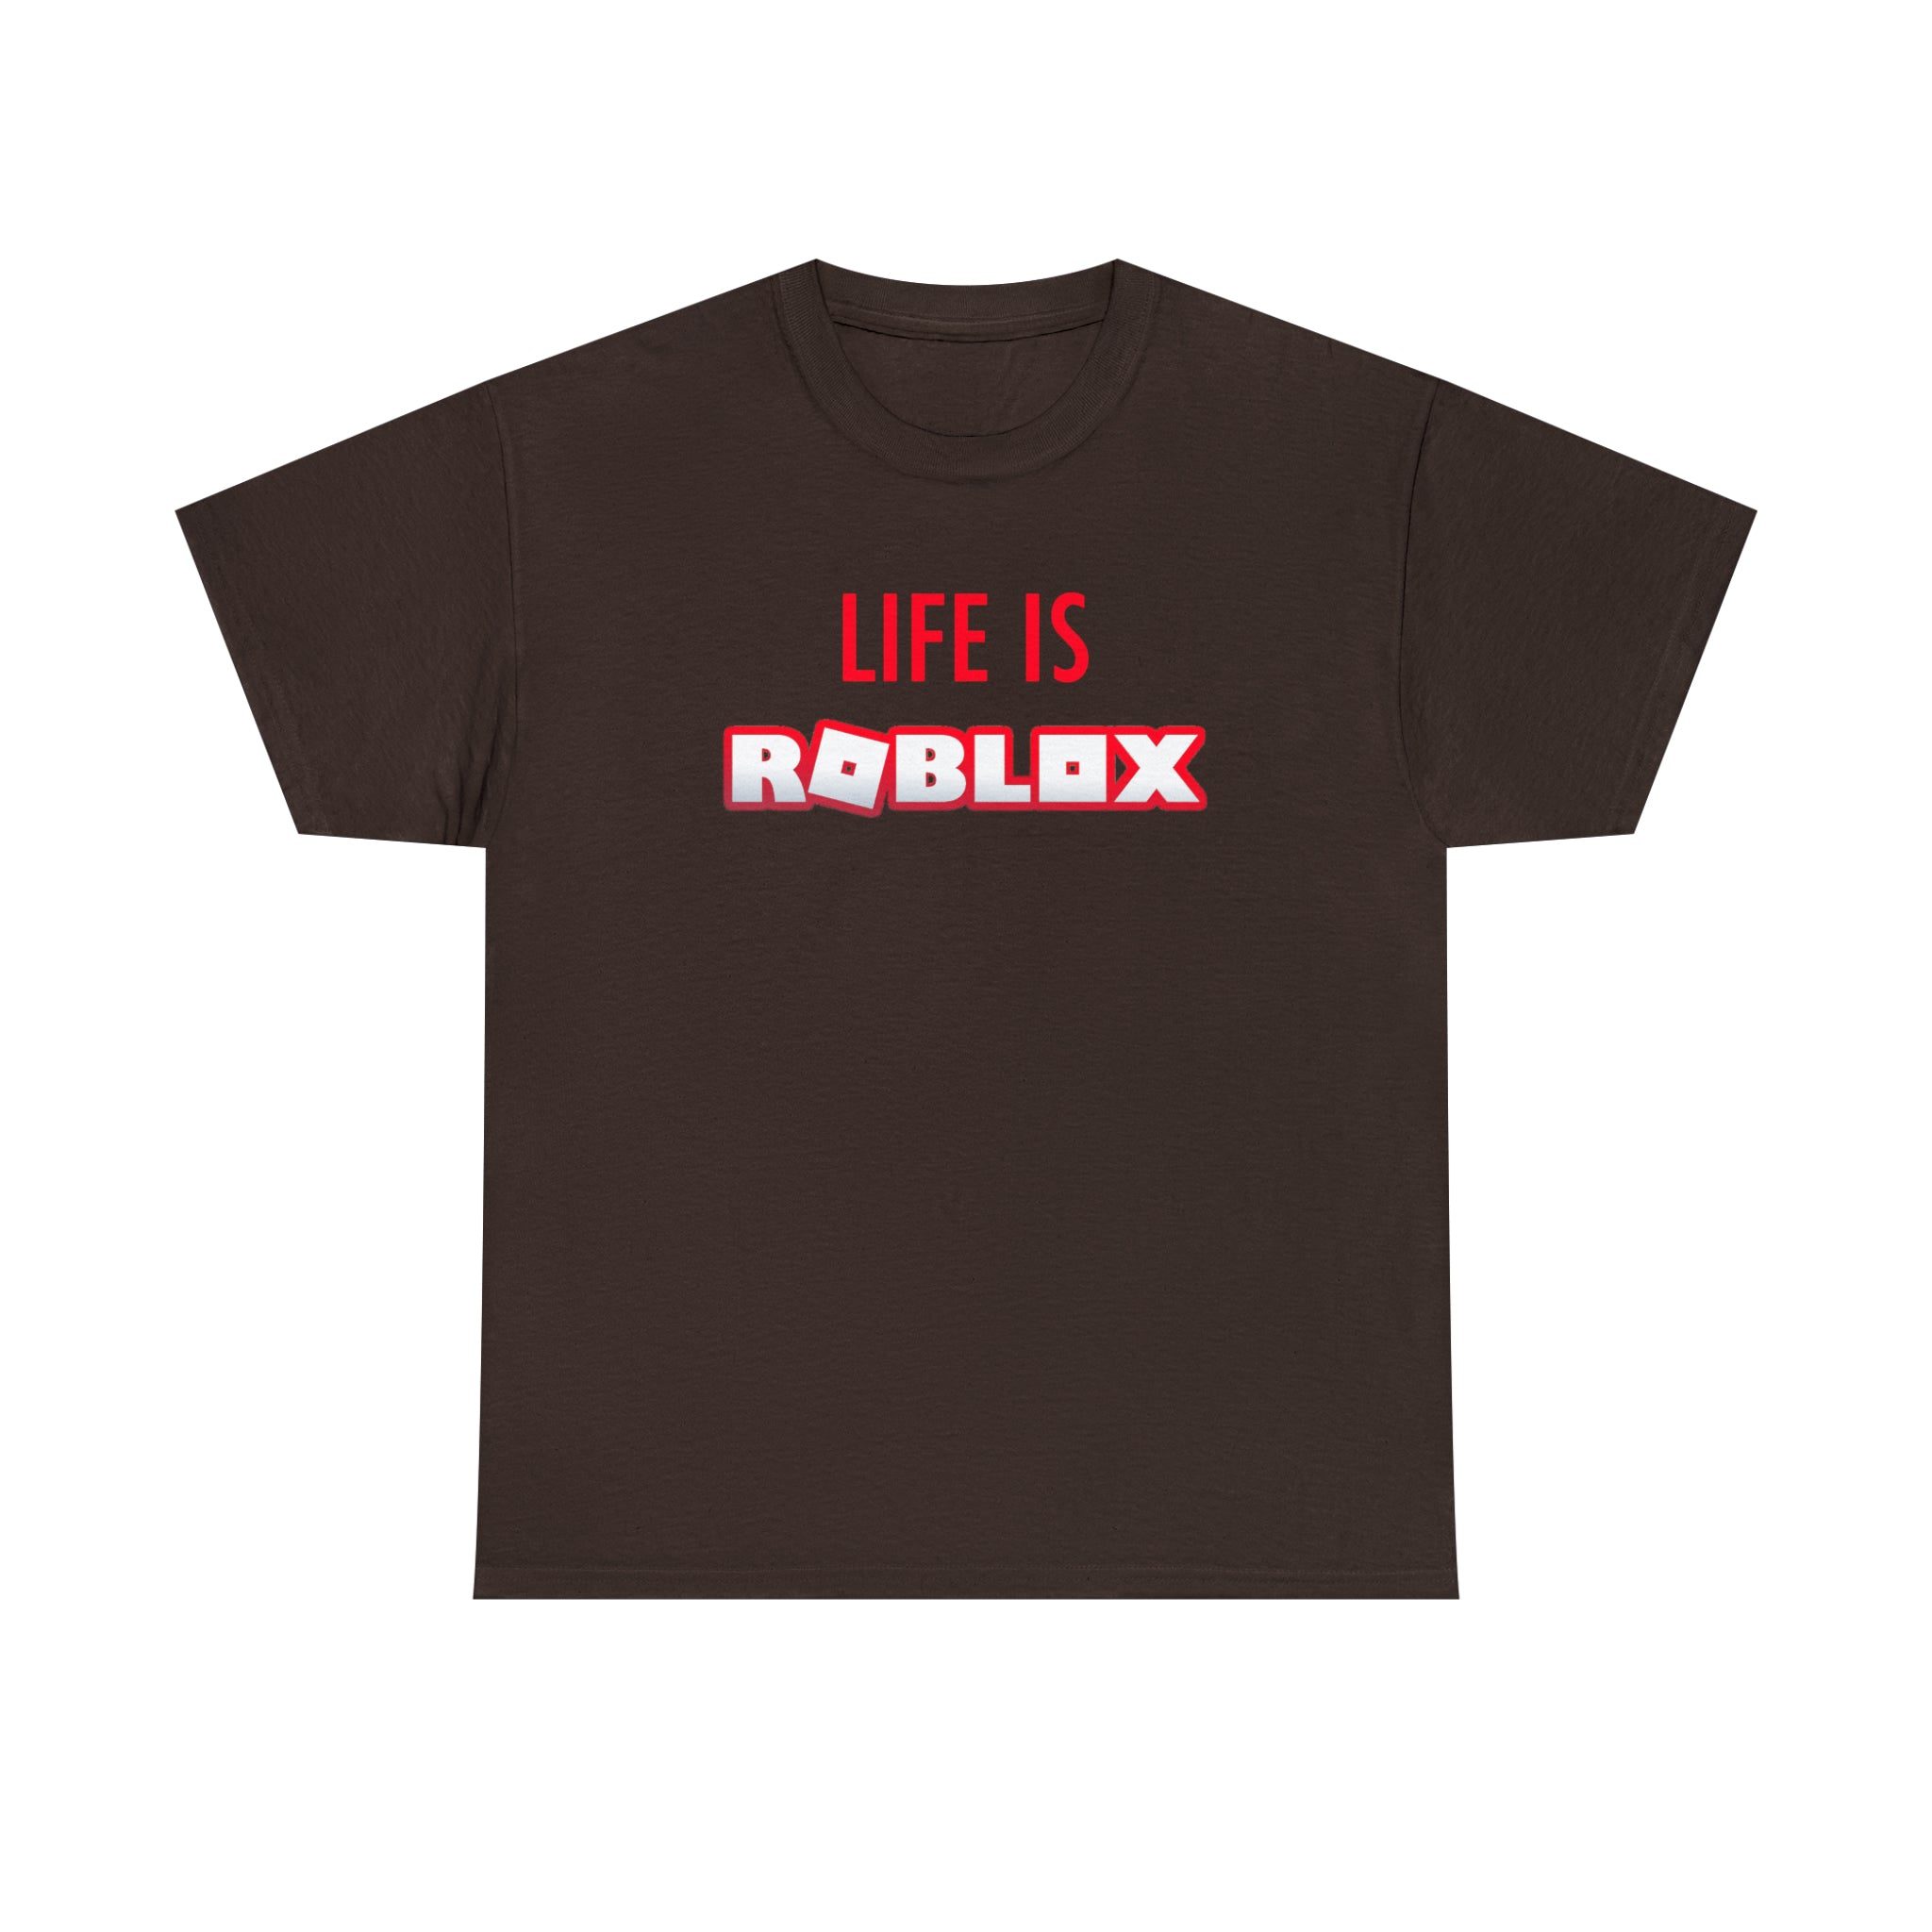 Life is roblox t – Lucca International